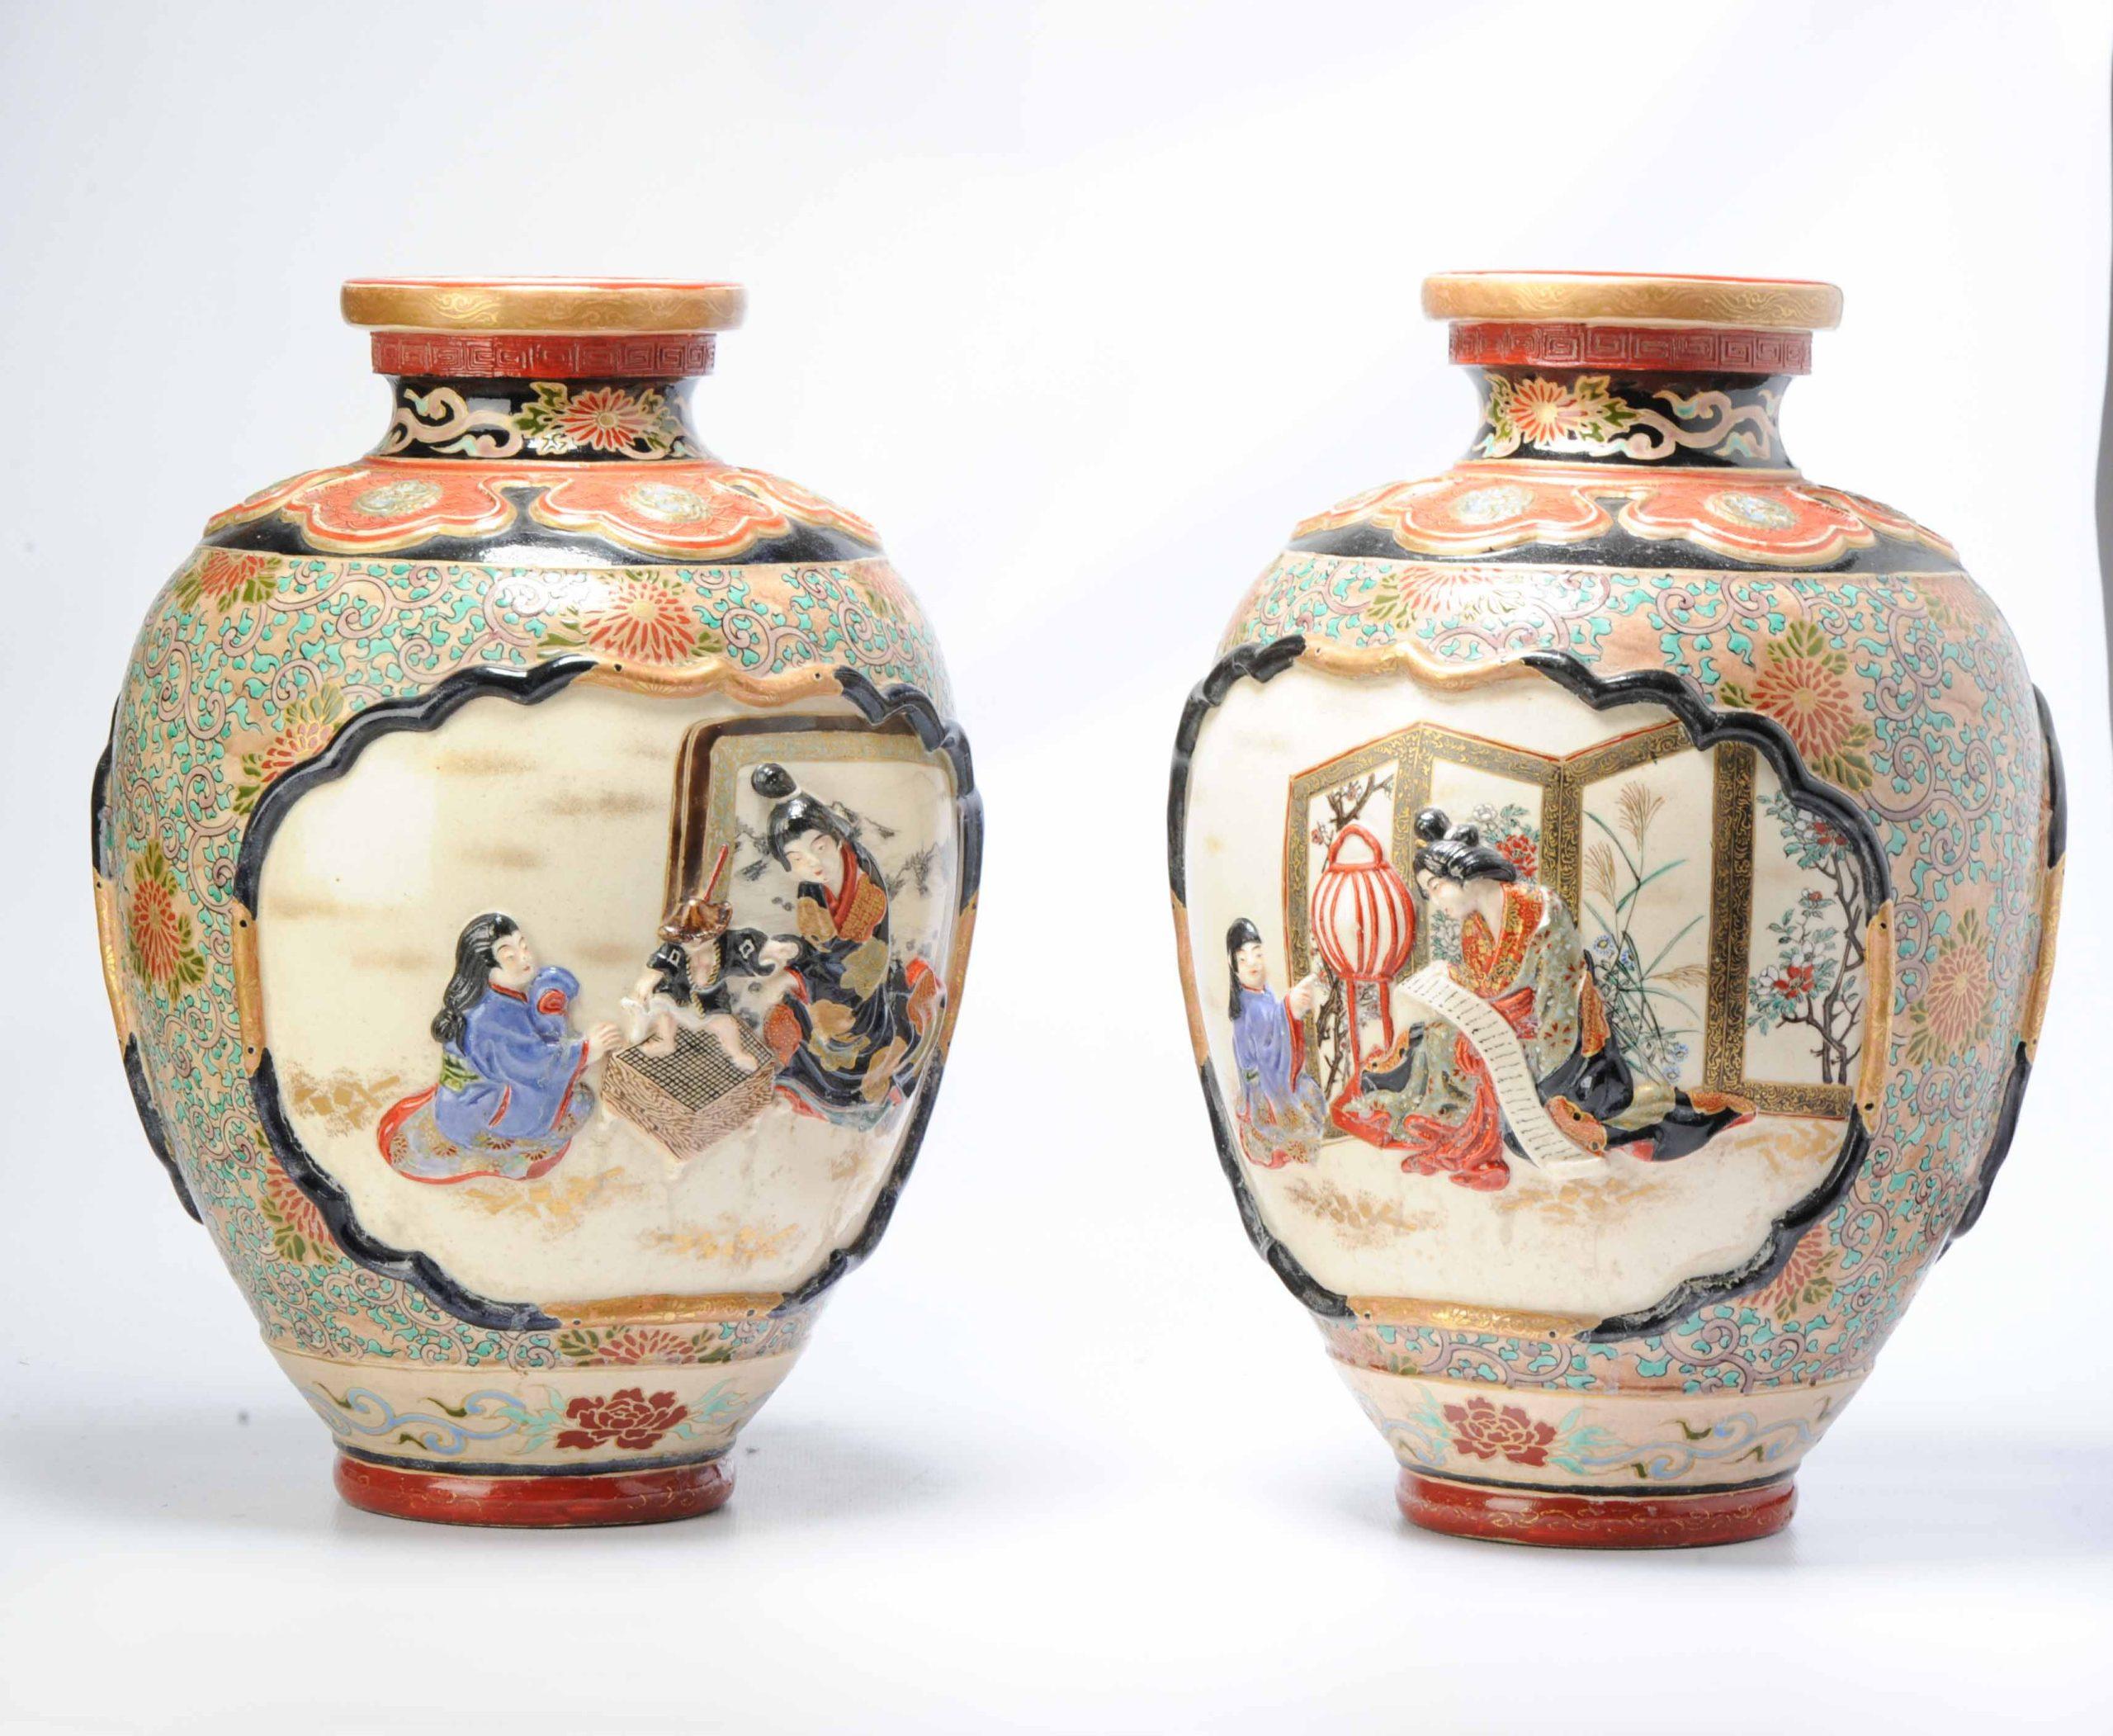 A japanese stsuma earthenware pair of vases of baluster shape, moulded with a scene with ladies playing go and doing calligraphy. There is relief.

Unmarked

Additional information:
Material: Porcelain & Pottery
Region of Origin: Japan
Period: 19th